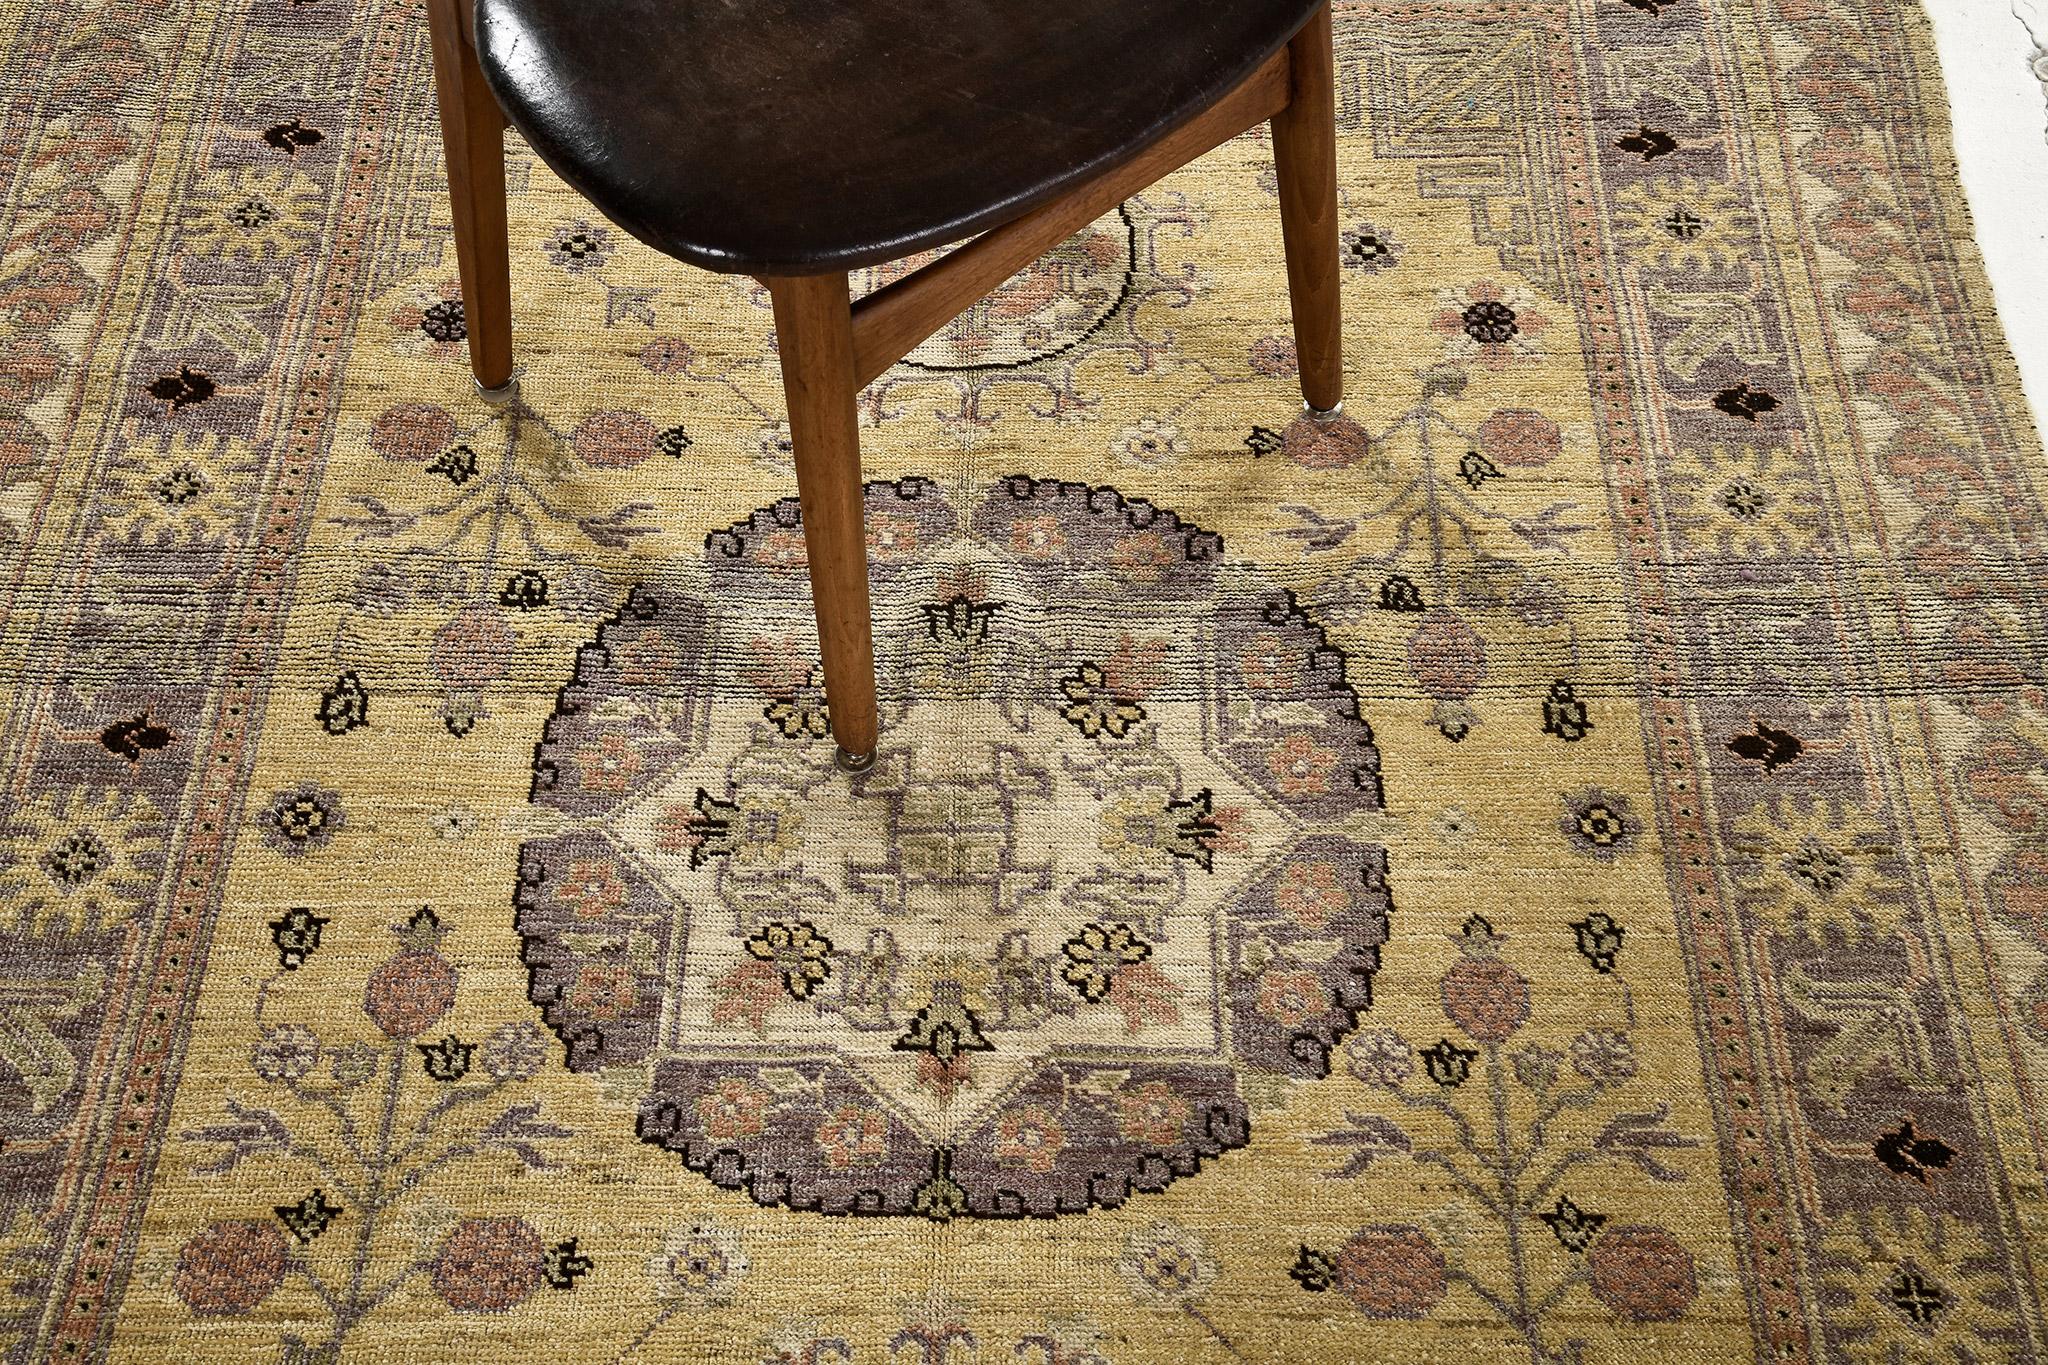 A sophisticated and chic collaboration of traditional and modern design Khotan revival rug that features a central medallion of florid garden elements surrounded by all-over sophisticated flower buds. Series of fascinating ornate borders encloses